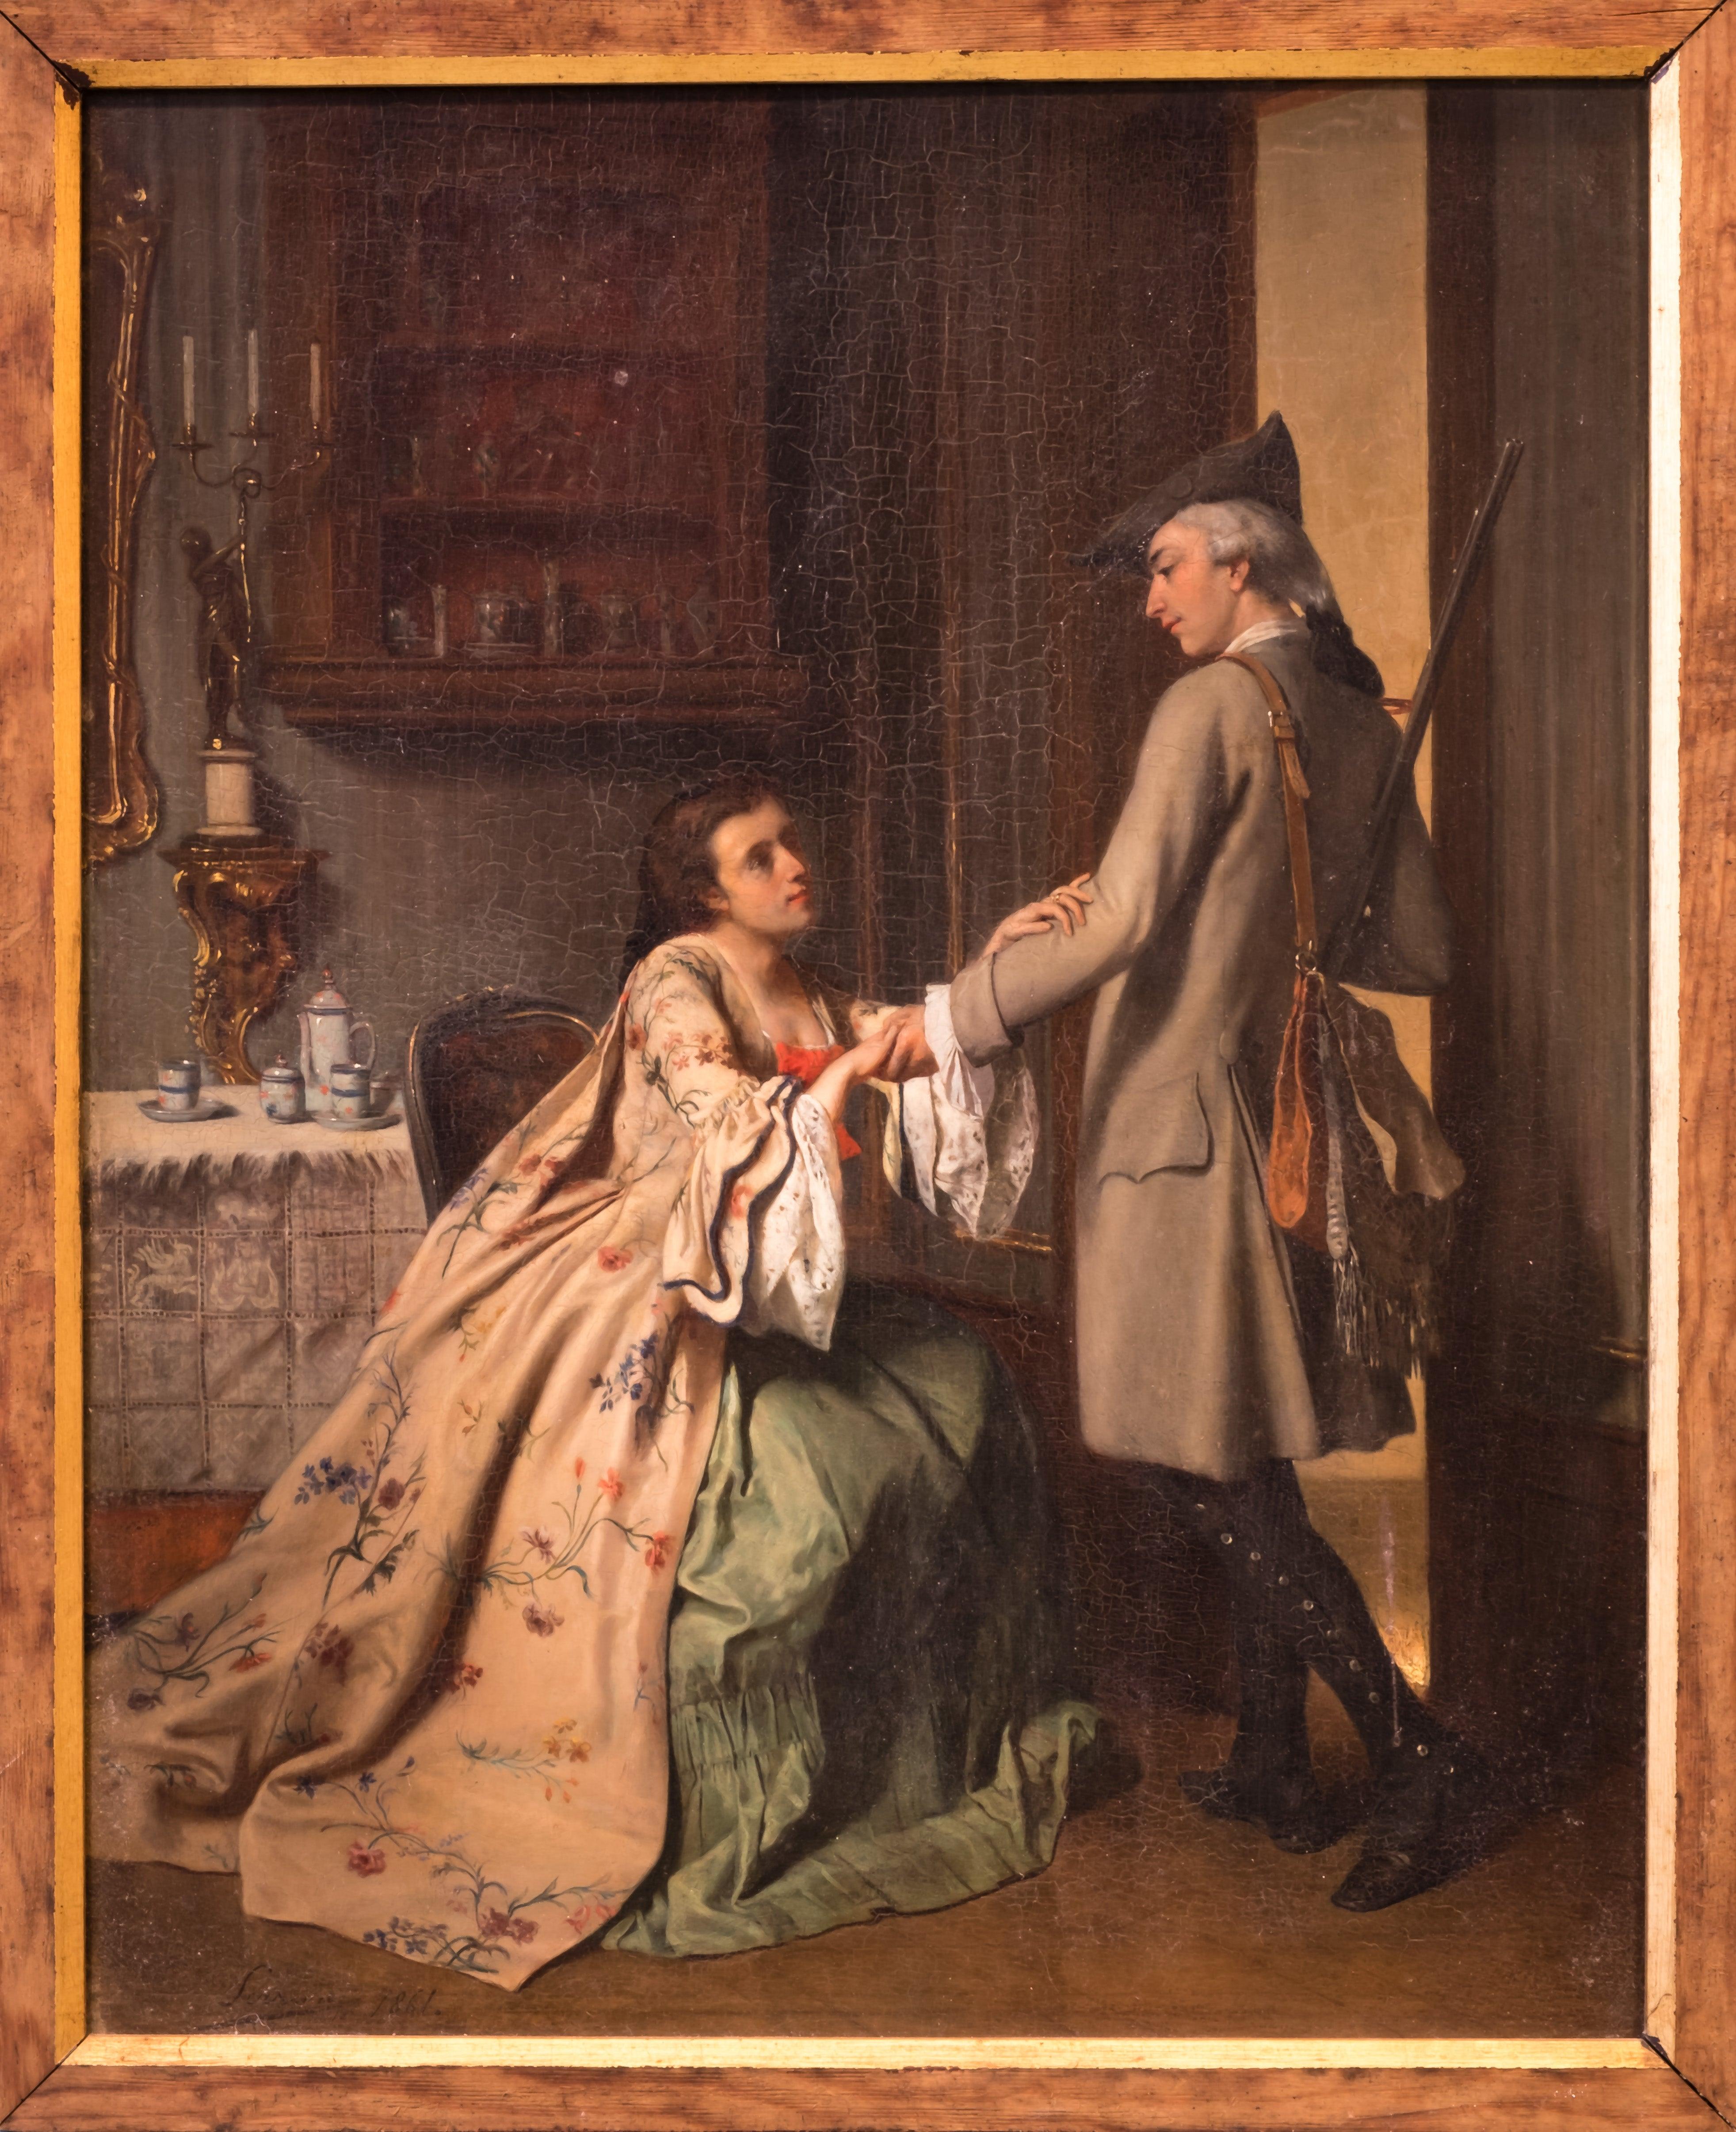 Painting depicting a scene of a couple, saying good-byes. 
The lady seated on a chair and wearing an elegant and elaborately crafted gown in the taste of 18th century.
A similar painting of this type is the well-known “The Black Brunswicker”